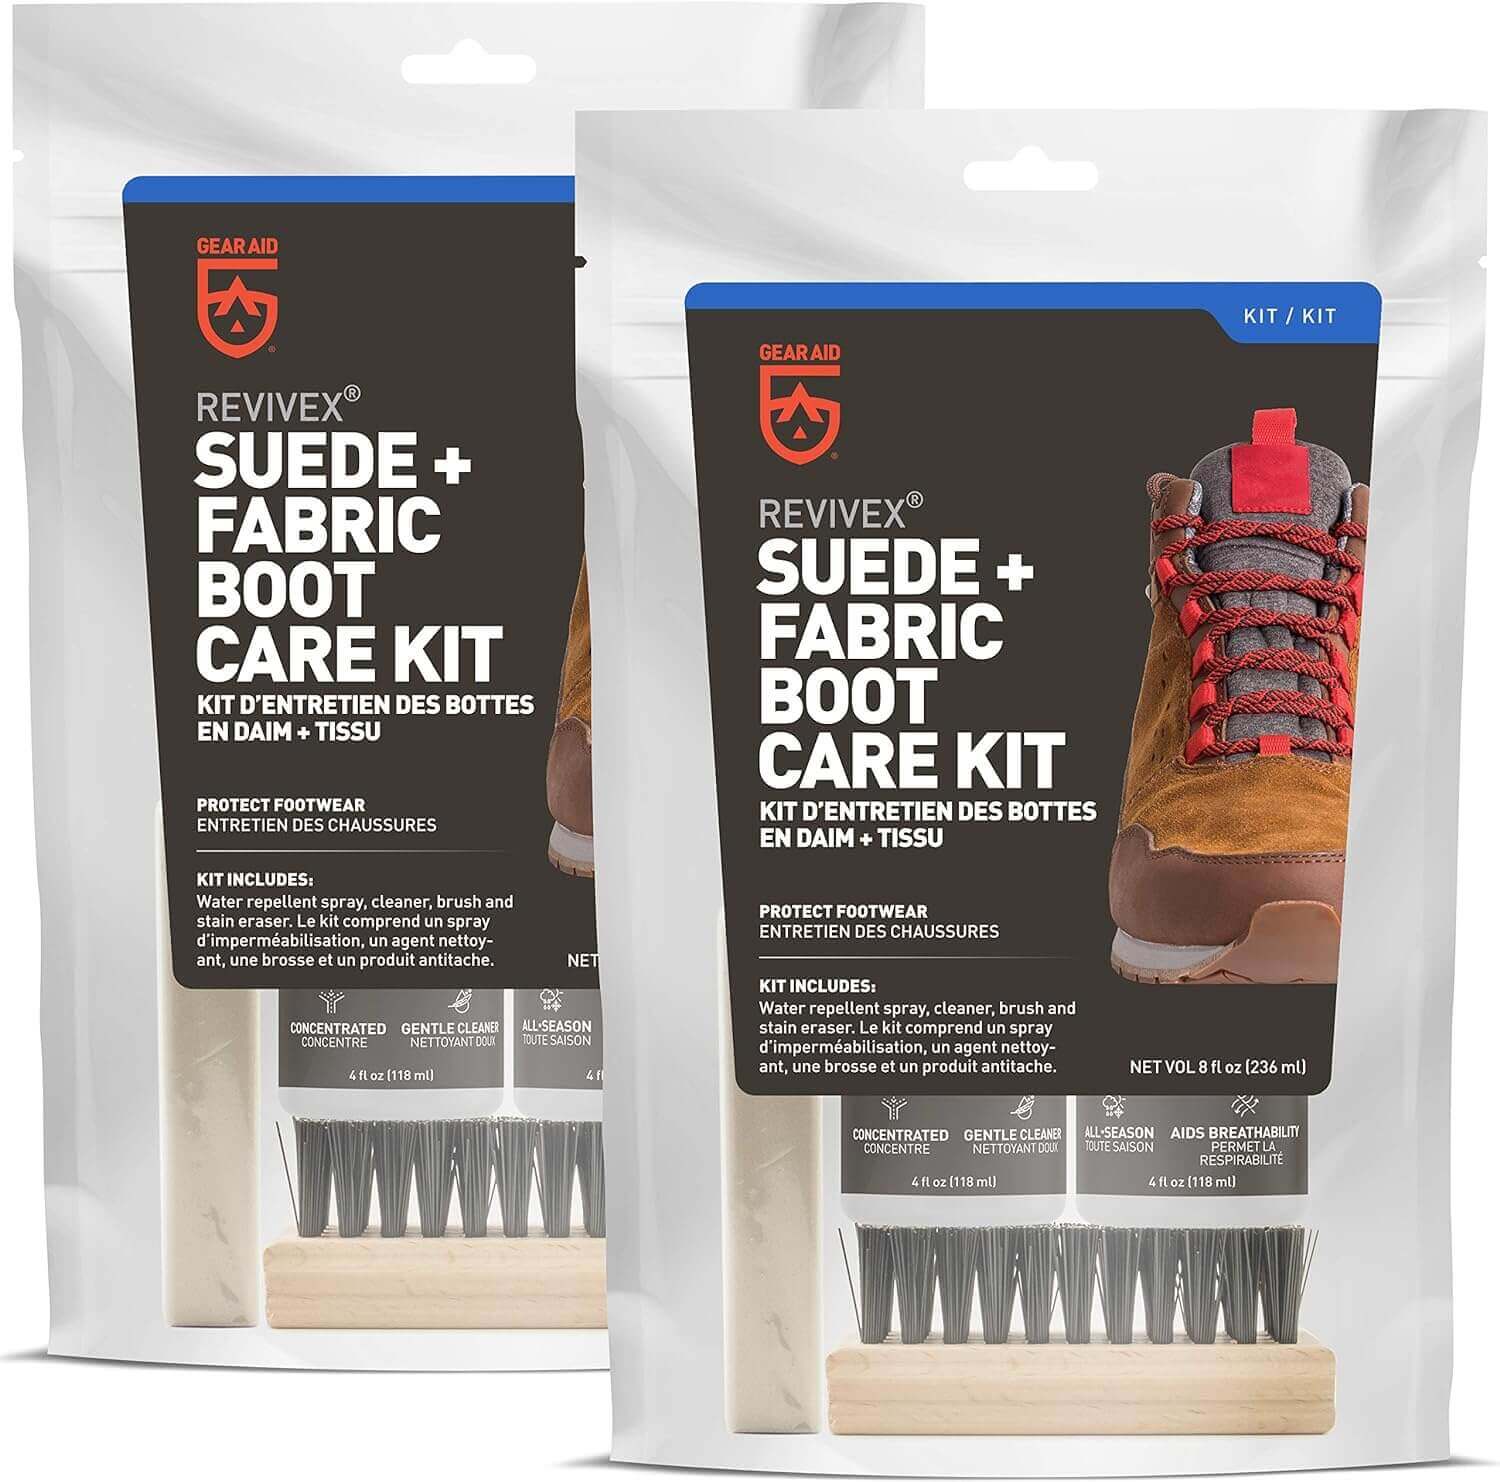 Shop The Latest >GEAR AID Revivex Suede, Nubuck Fabric Boot and Shoe Care Kit > *Only $53.99*> From The Top Brand > *Gear Aidl* > Shop Now and Get Free Shipping On Orders Over $45.00 >*Shop Earth Foot*